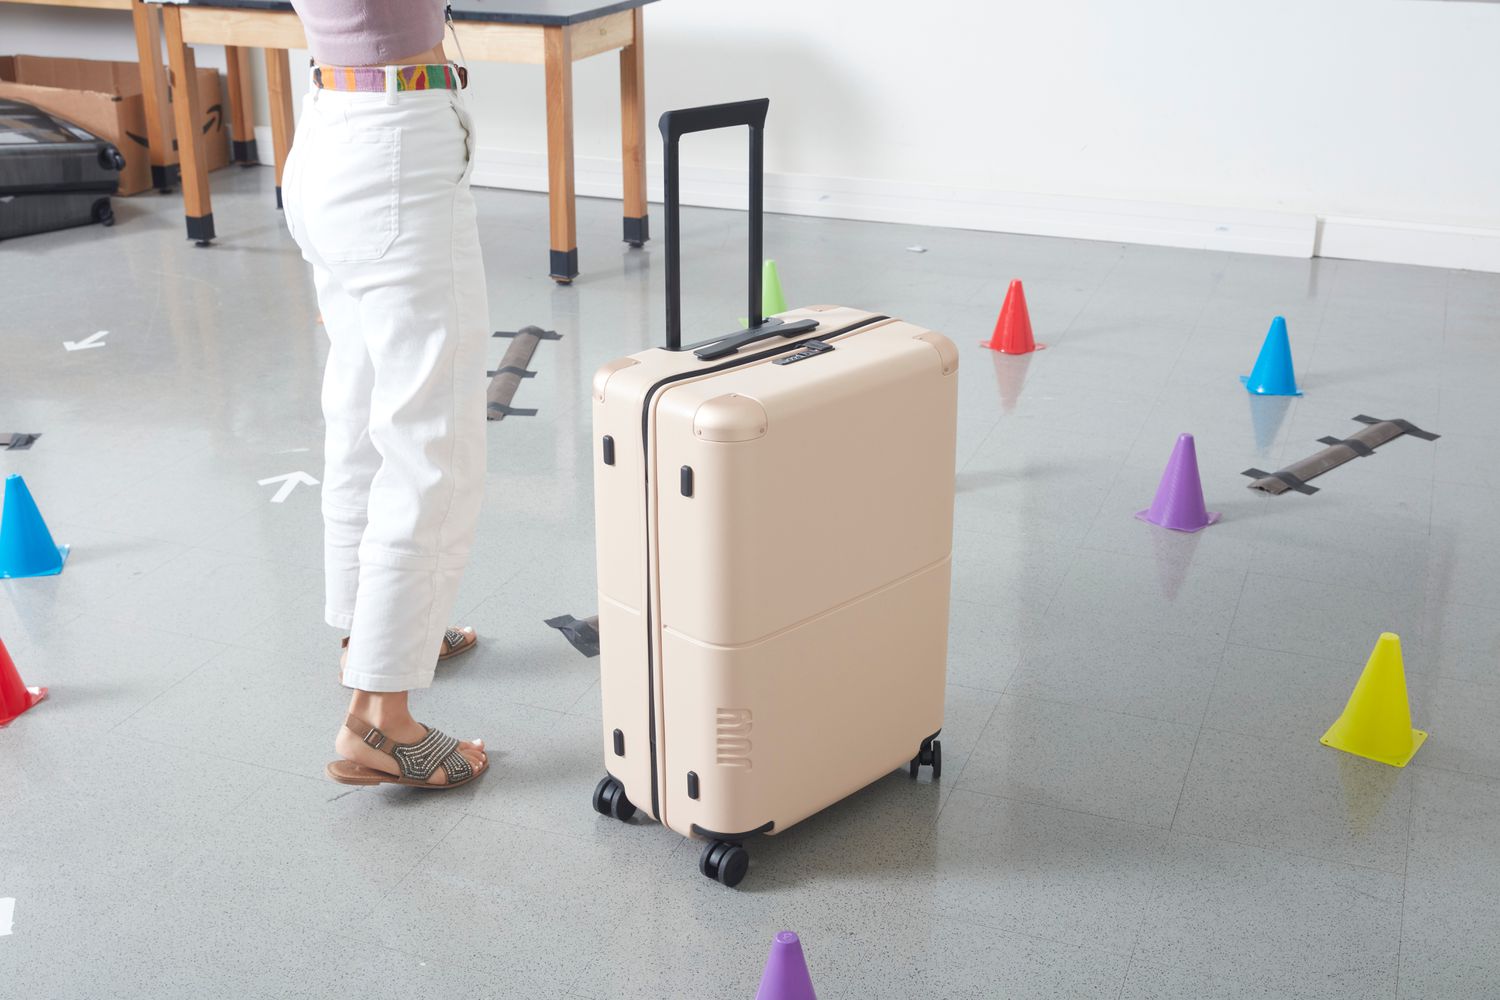 Person standing next to the July Checked Suitcase next to colorful cones during product testing